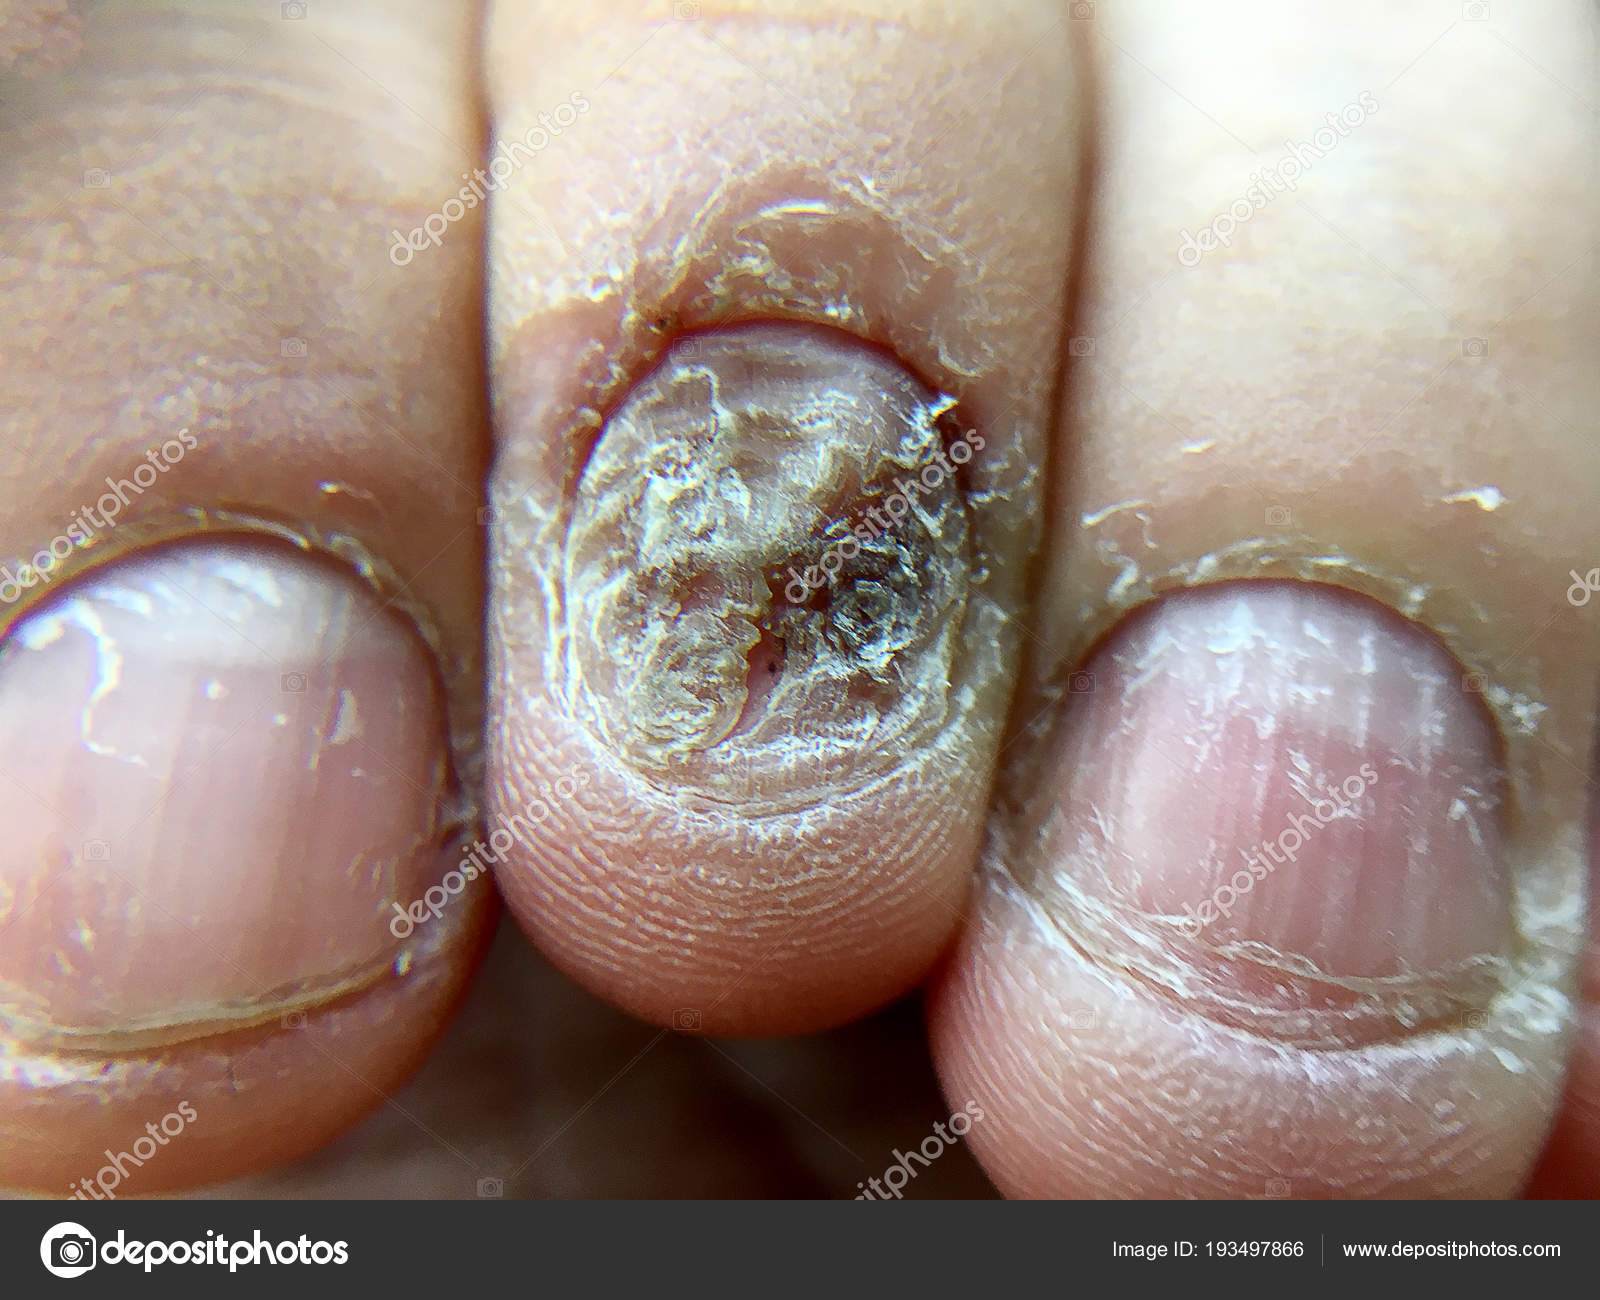 How to Cure Fingernail Fungus Fast at Home: Effective Home Remedies and Tips